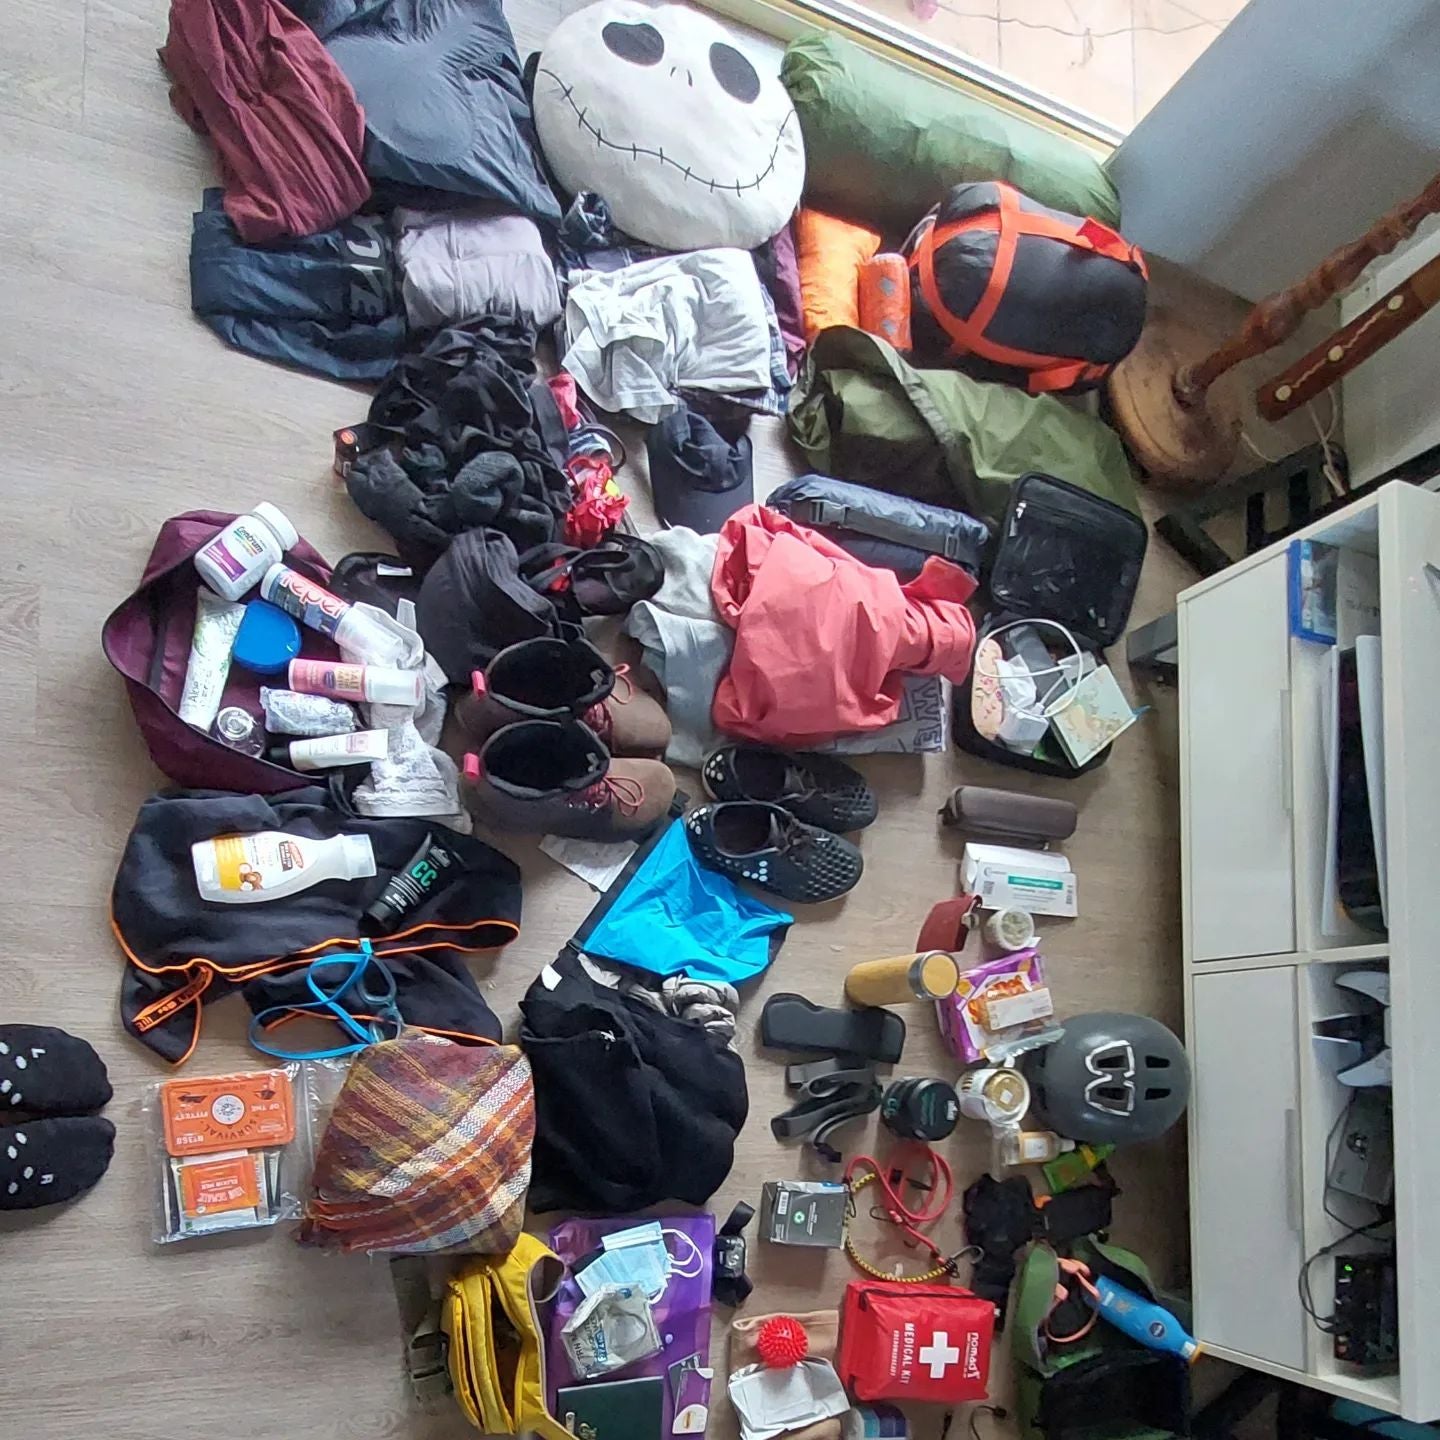 Multiple bags and packed items laid out on a wooden floor.